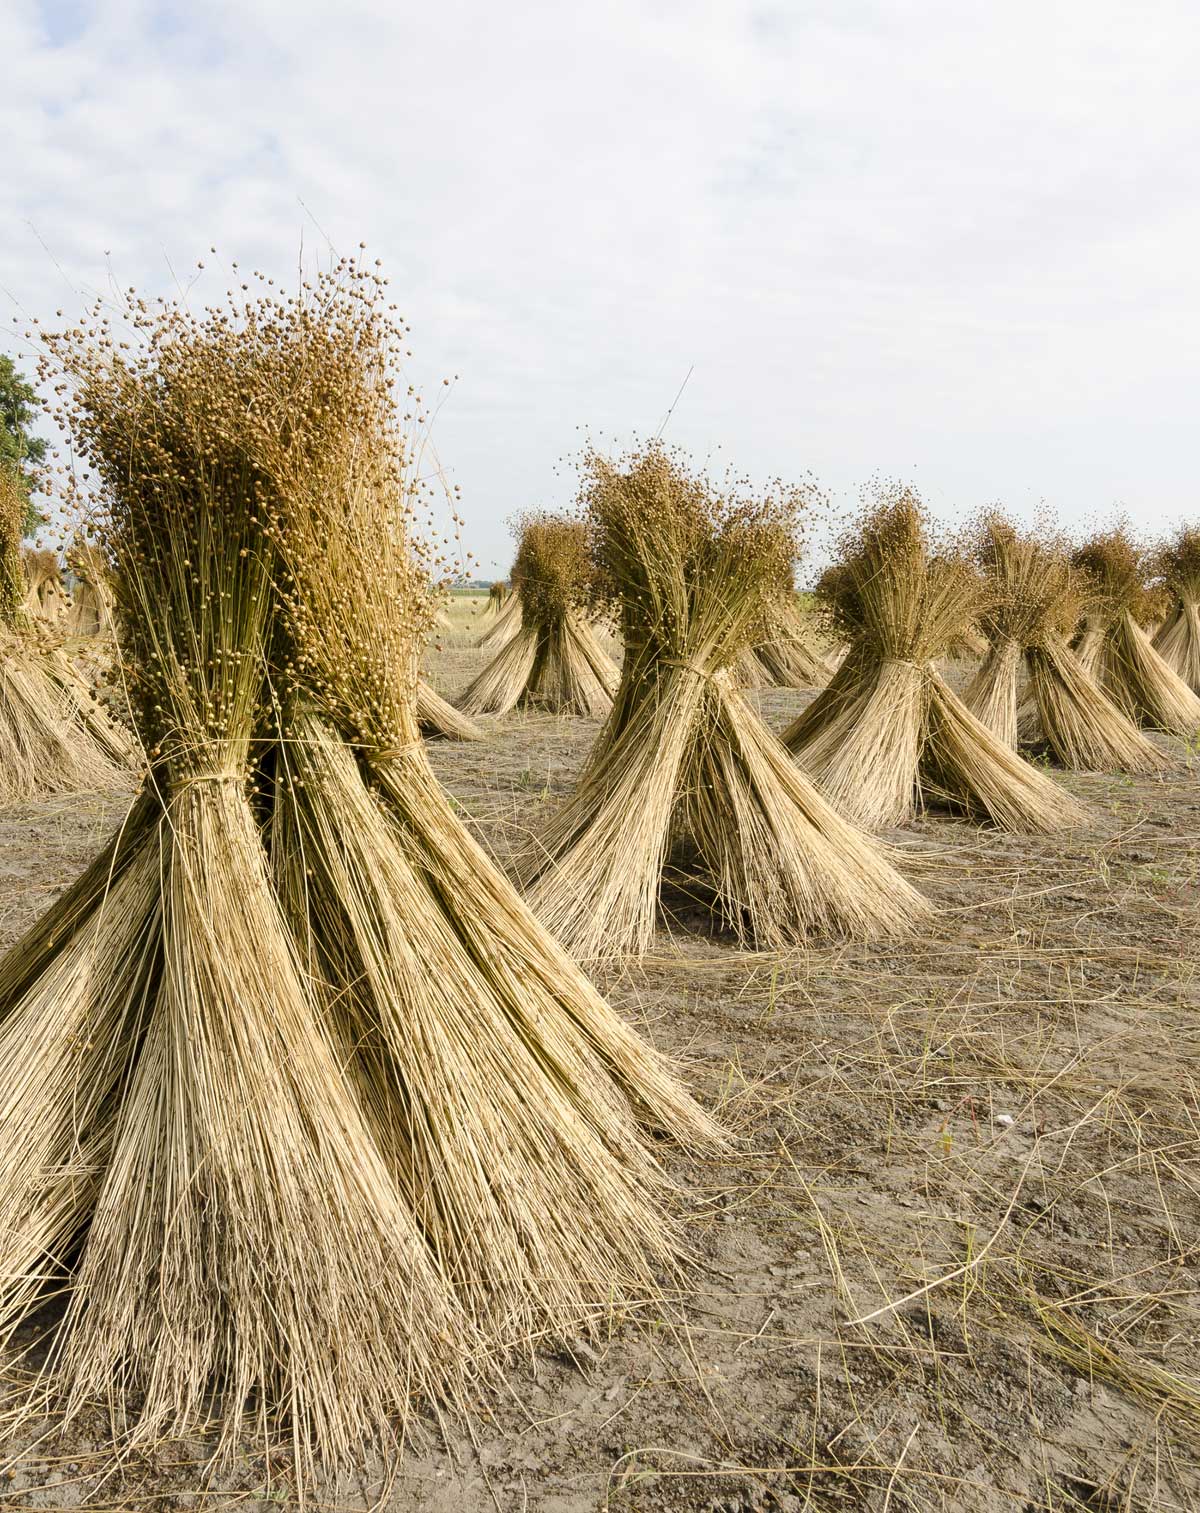 Towers of flax harvested and bundled in a field, waiting to be made into linen.